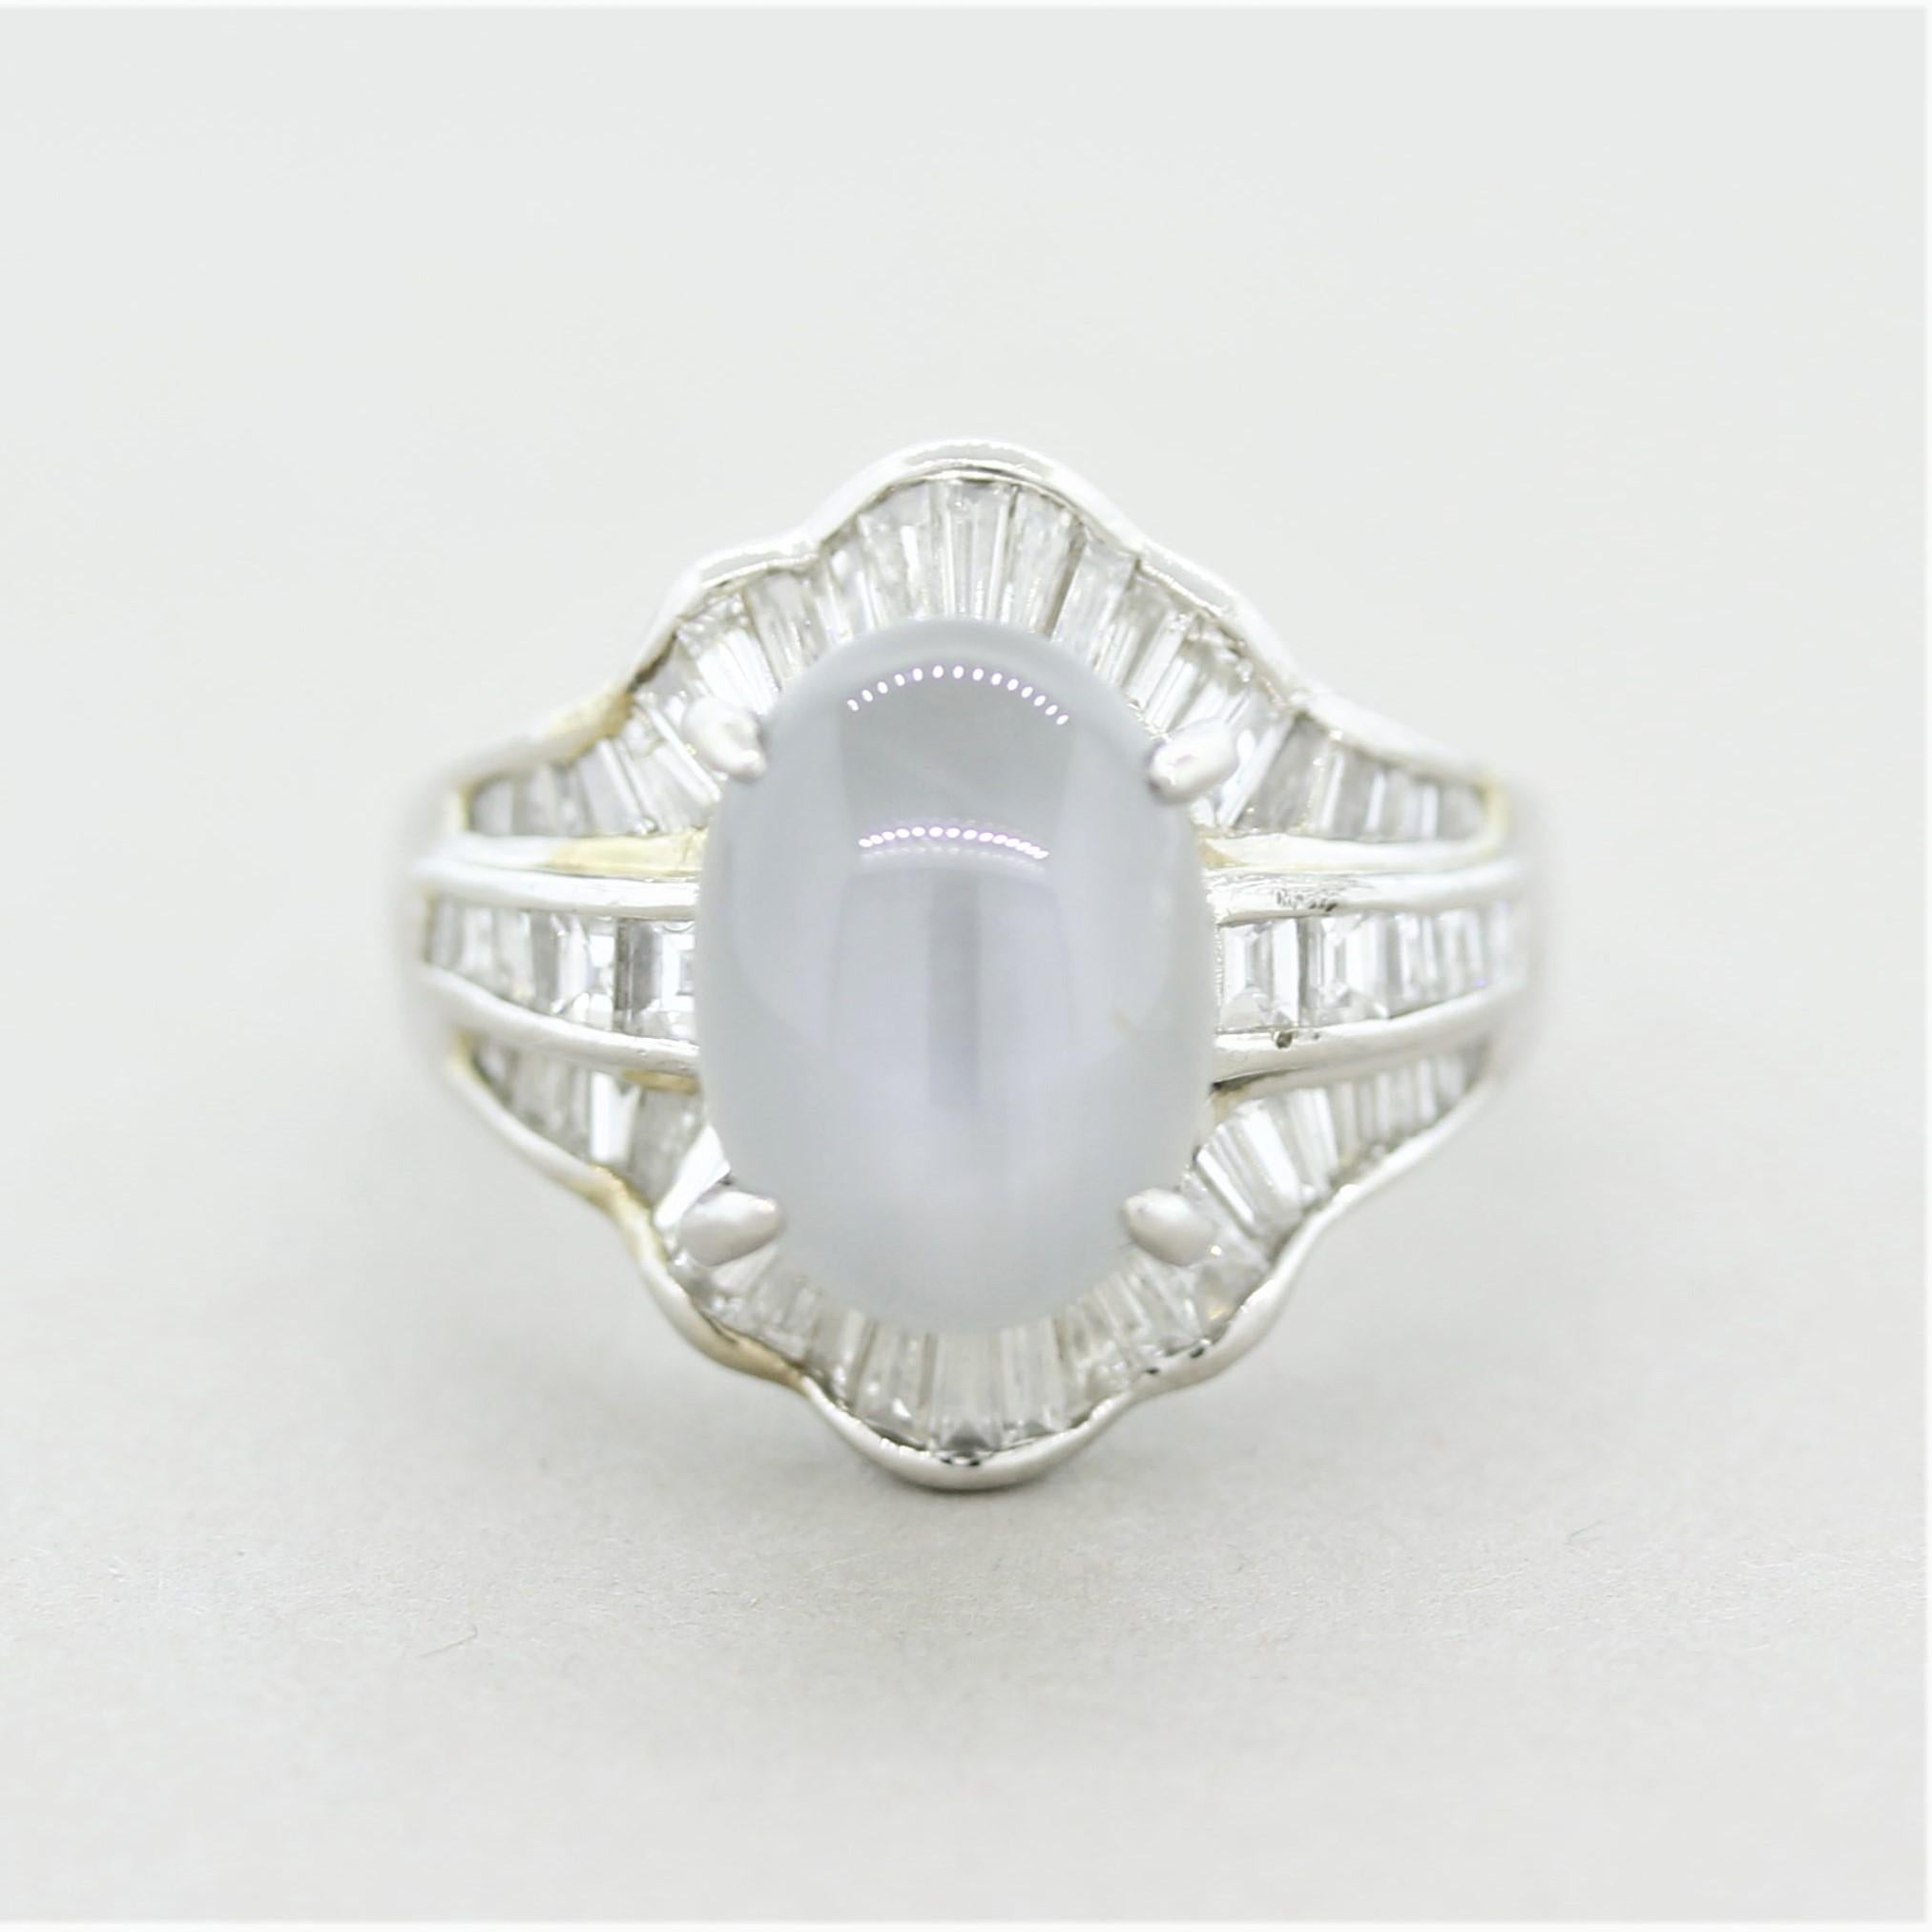 A fine platinum ring featuring a 8.26 carat star sapphire. The sapphire has a unique soft gray color and a lovely six-rayed star when a light hits the top of the stone. It is further accented by 1.38 carats of square-shaped and baguette-cut diamonds